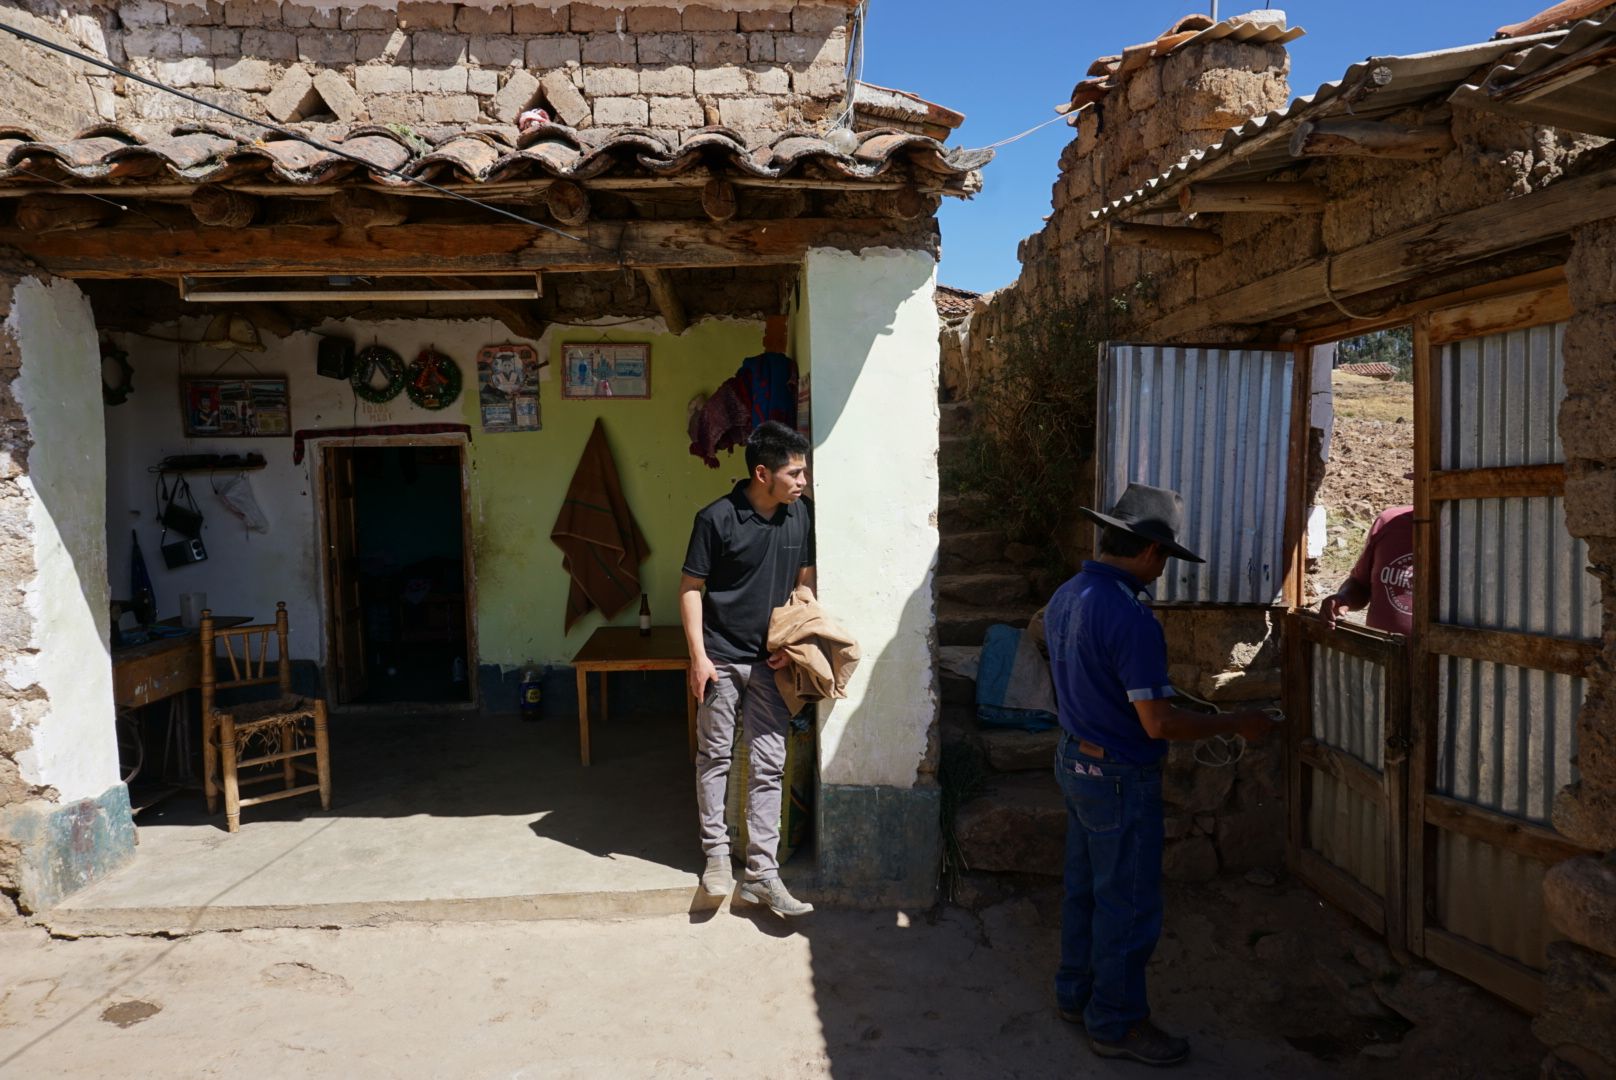 Clinton (center) works in Huaraz, but makes the three-hour journey to visit his parents in their village once a month. Image by Audrey Fromson. Peru, 2019.